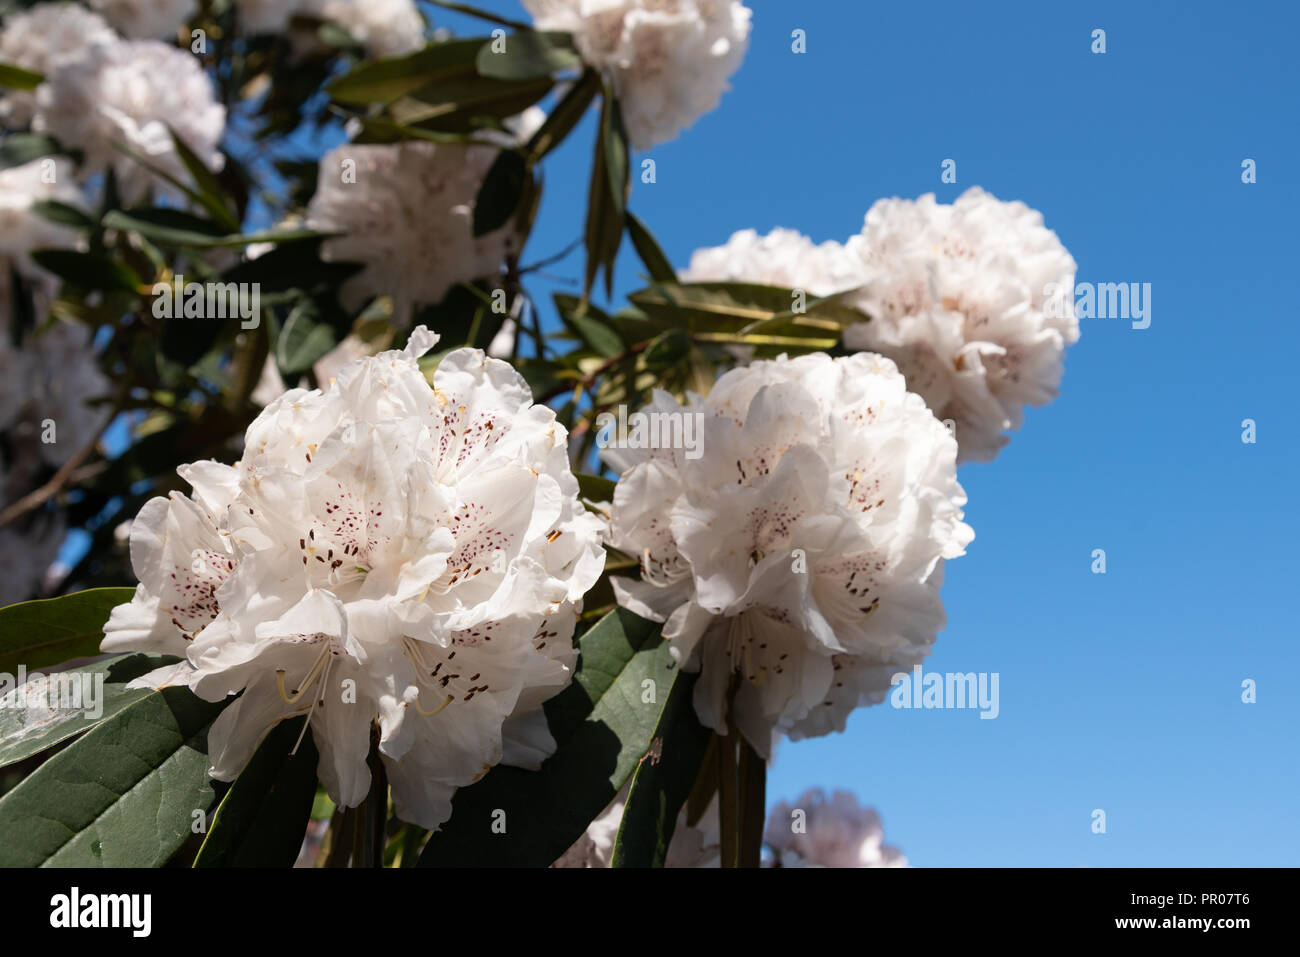 Rhododendron flowers in spring Stock Photo